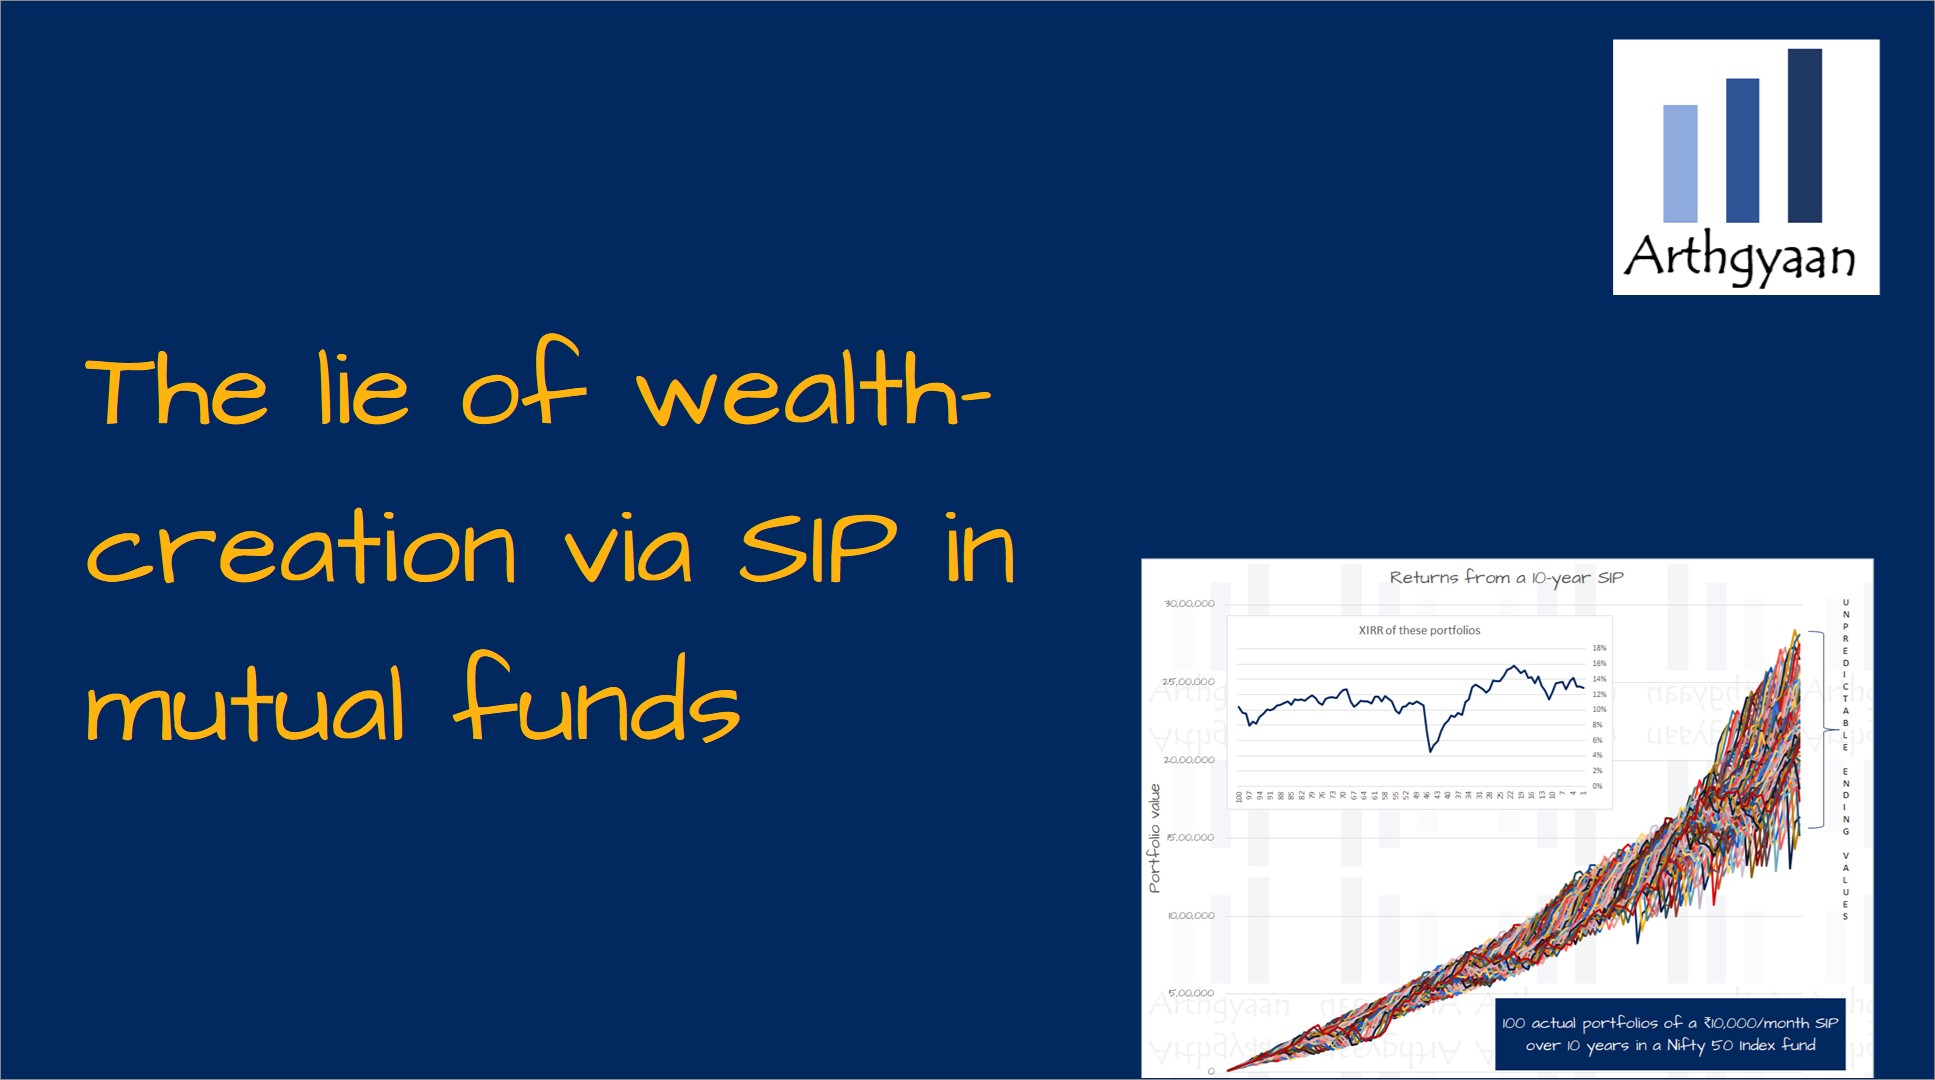 <p>This article shows you that investing via SIP in a mutual fund does not create wealth.</p>

